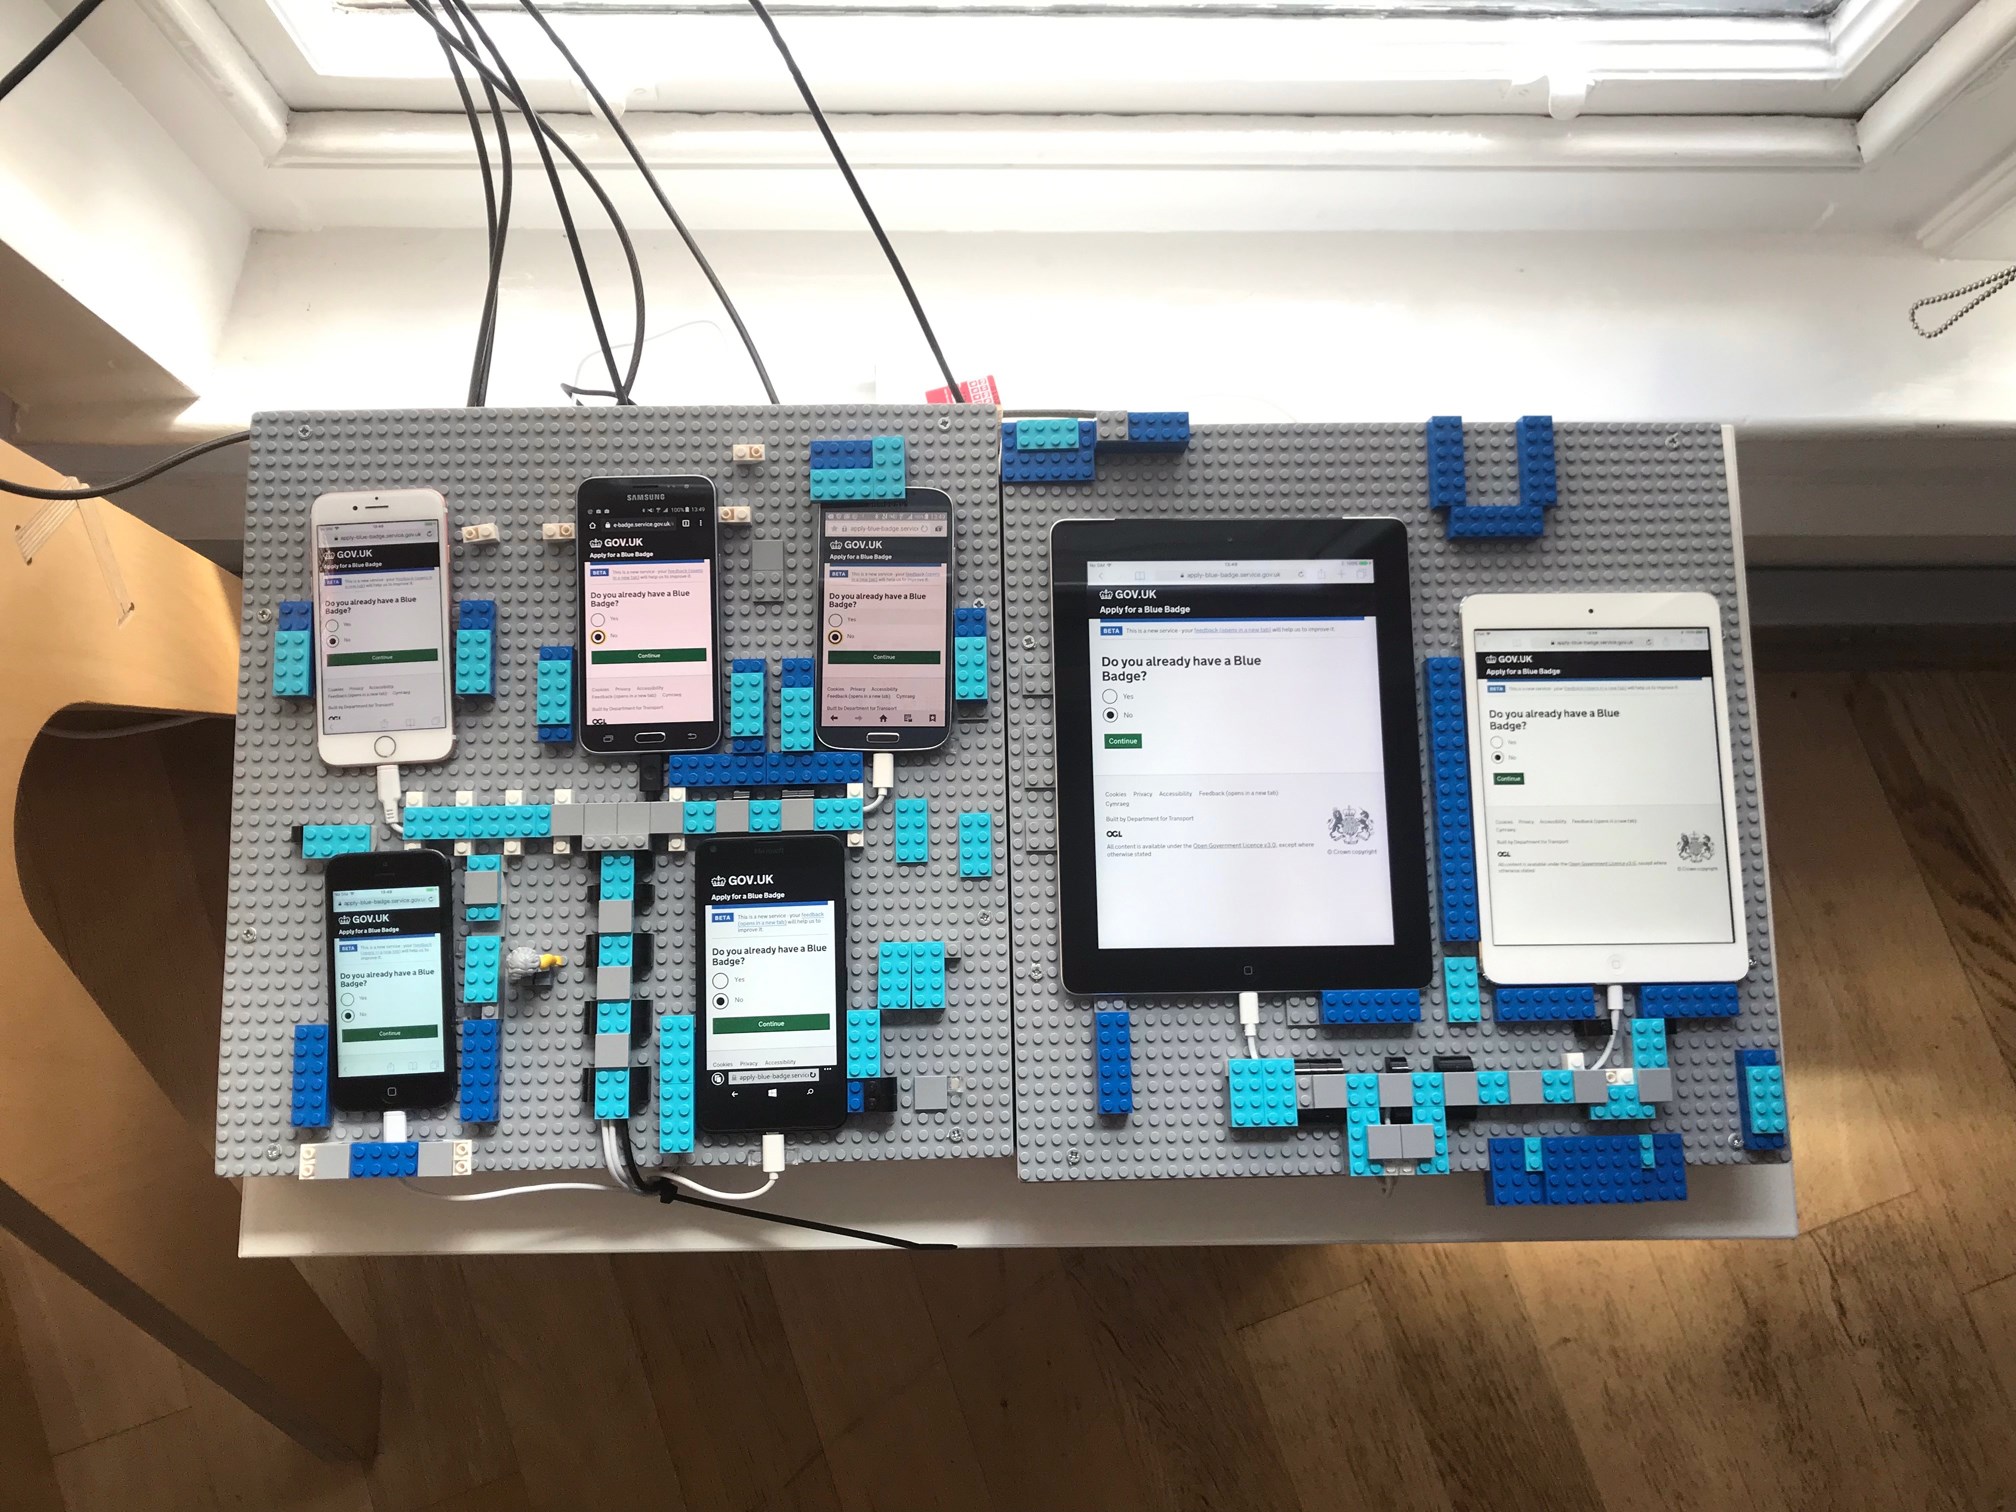 The Blue Badge Digital Transformation team’s device lab in Manchester. The lab consists of: Windows Mobile, Samsung Galaxy S4, Samsung Galaxy S5, iPad mini, iPad, iPhone 5, iPhone 6 and a Dell laptop. The iOS devices come with Voice Over screen reader, and the laptop has JAWS 2018 and Nuance Dragon 15 installed